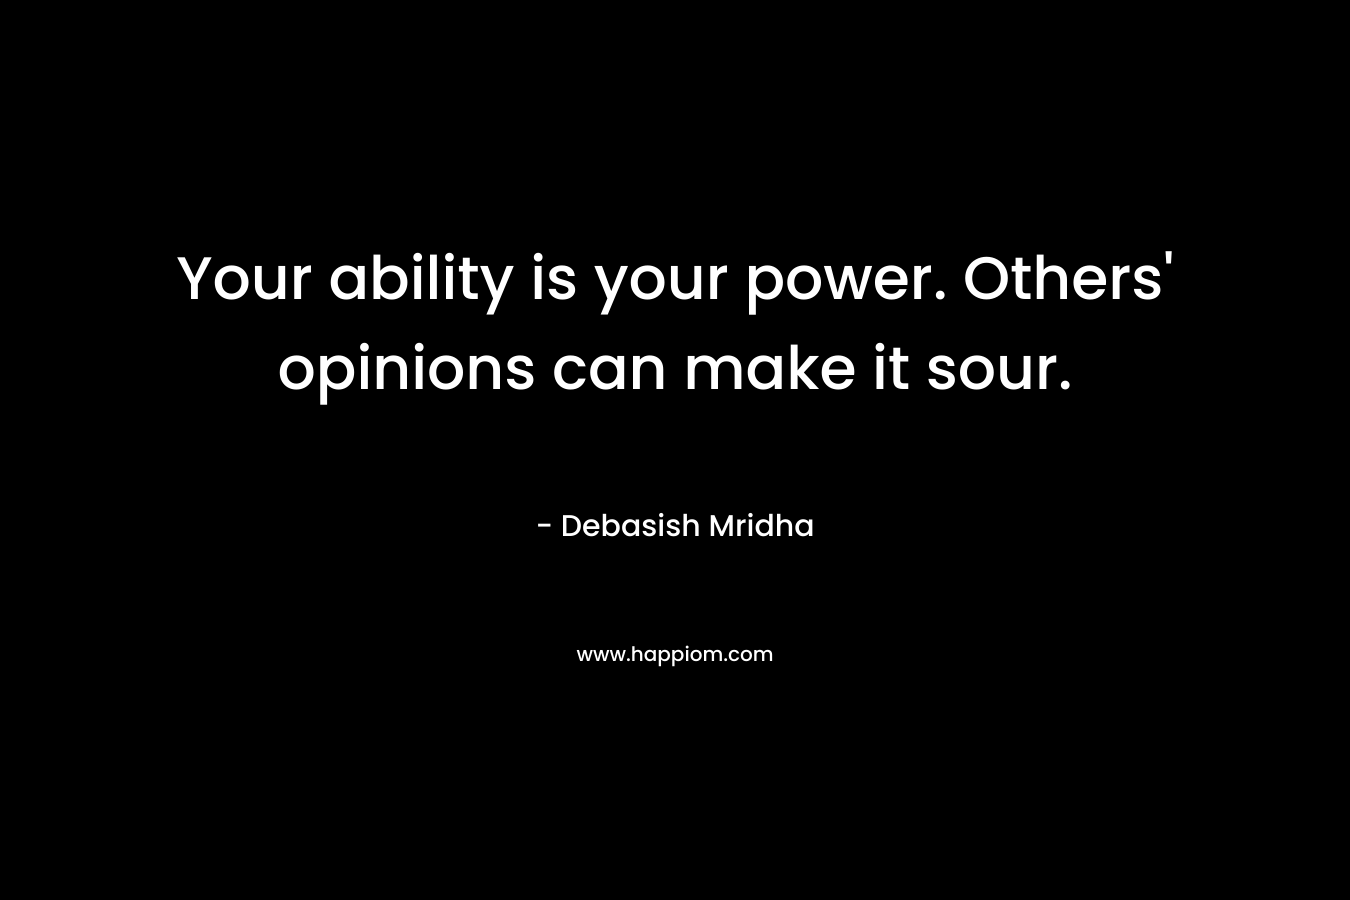 Your ability is your power. Others’ opinions can make it sour. – Debasish Mridha